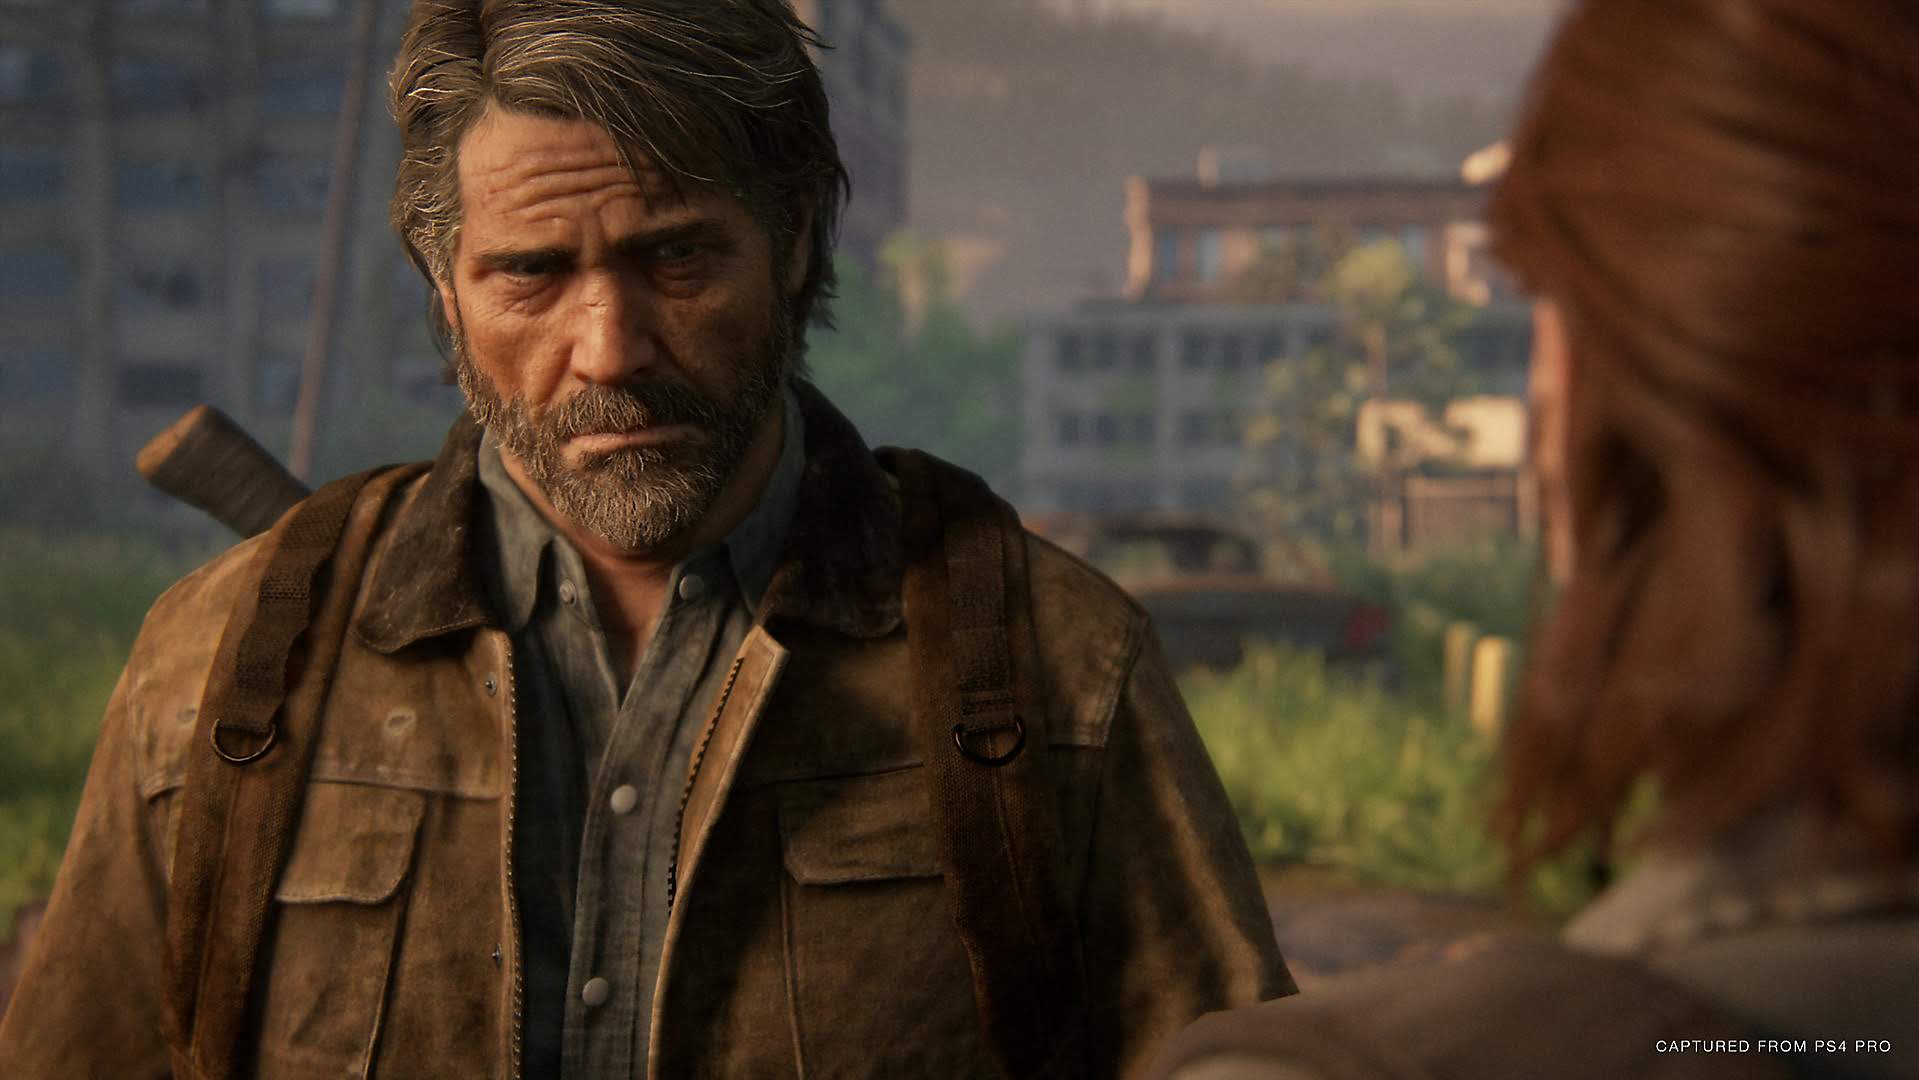 The Last of Us 2 file size confirms it'll be the largest PS4 exclusive yet